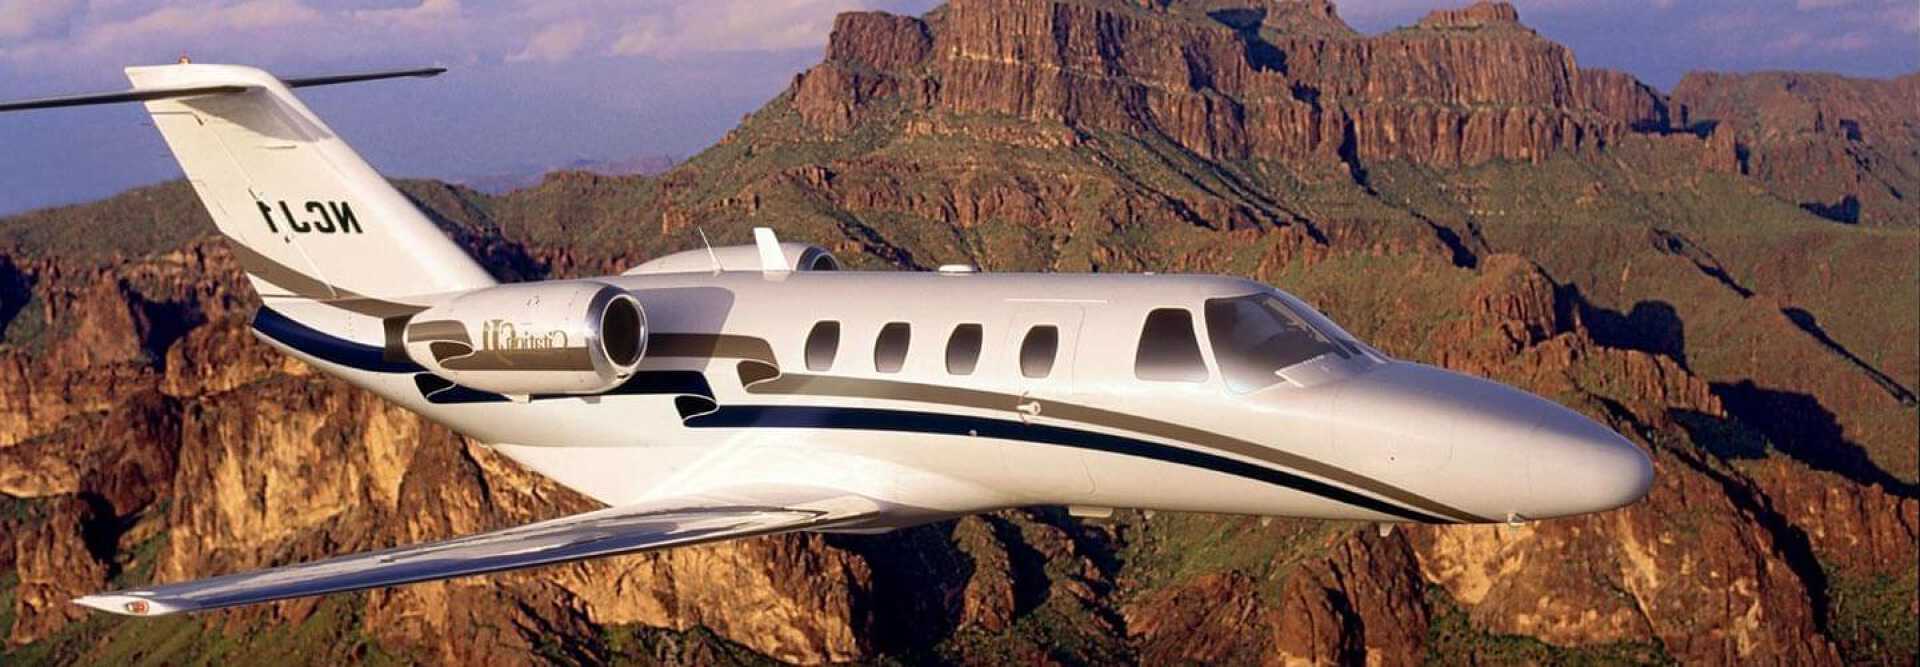 Light Jet Cessna Citation CJ1 to charter for private intra-european flights with LunaJets,increased performance, spacious, weekend break, CJ1 